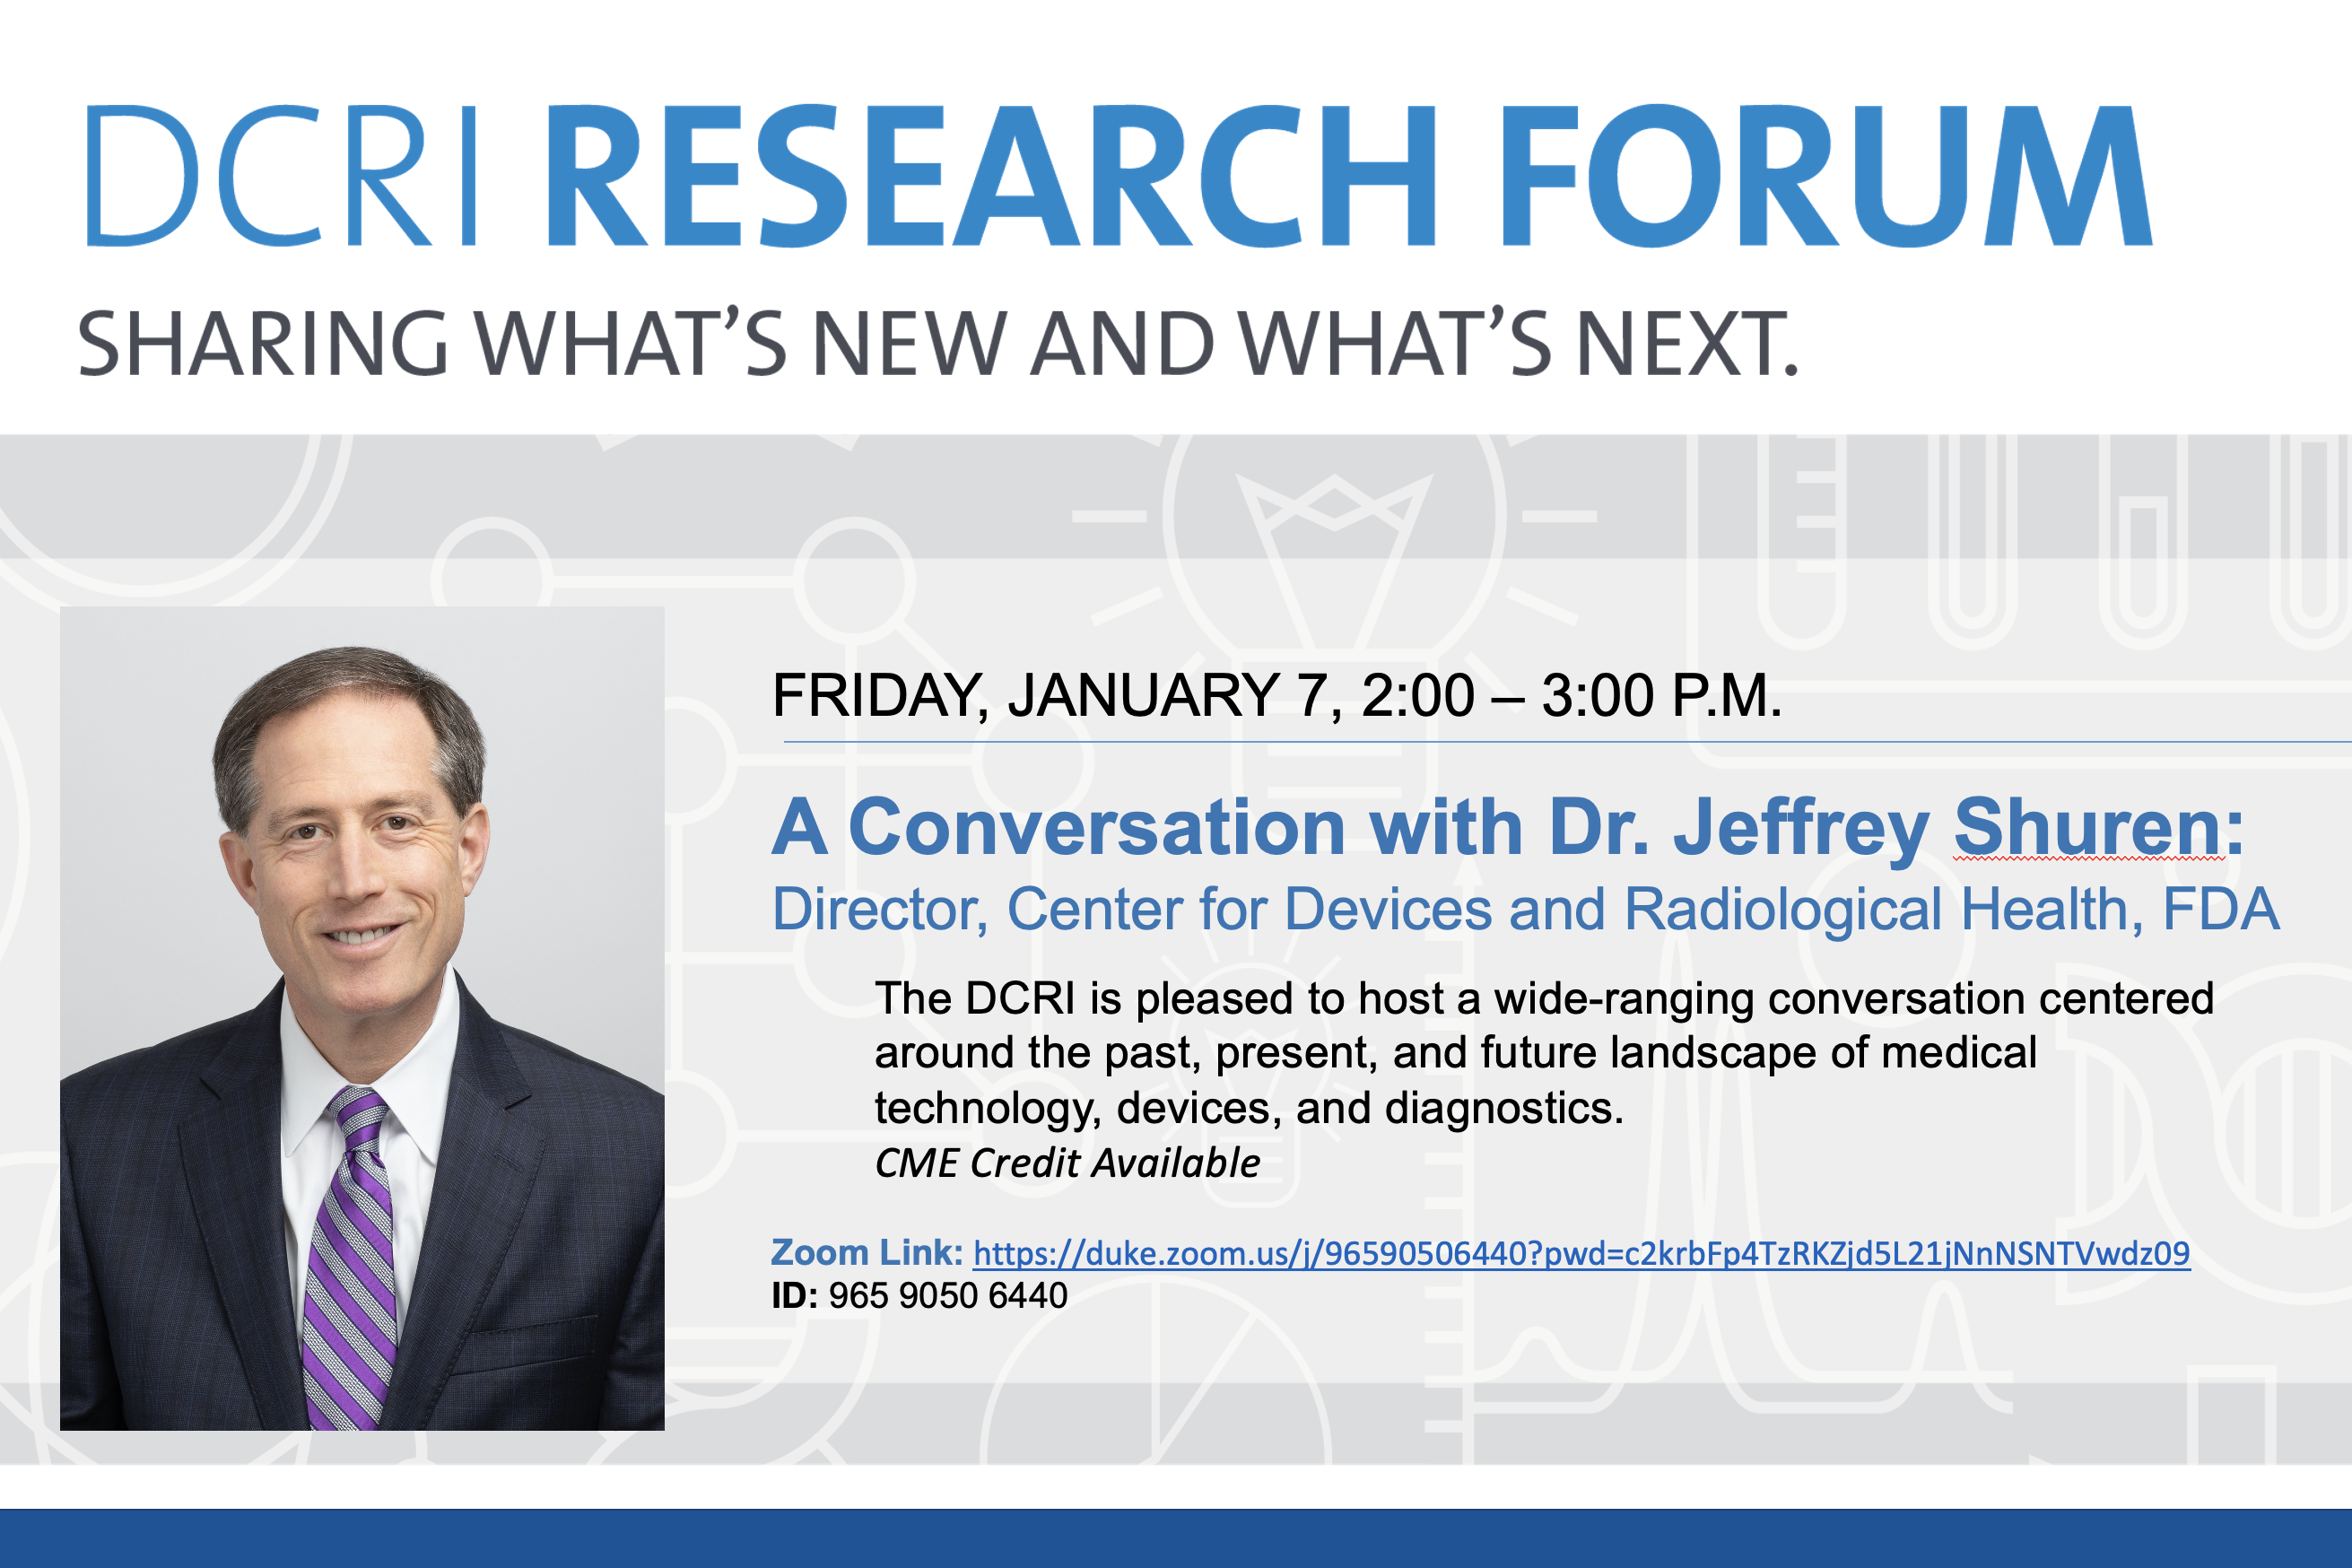 Join the DCRI Research Forum on January 7, 2022 from 2-3 p.m. for a conversation with the FDA's CDRH director, Dr. Jeffrey Shuren.